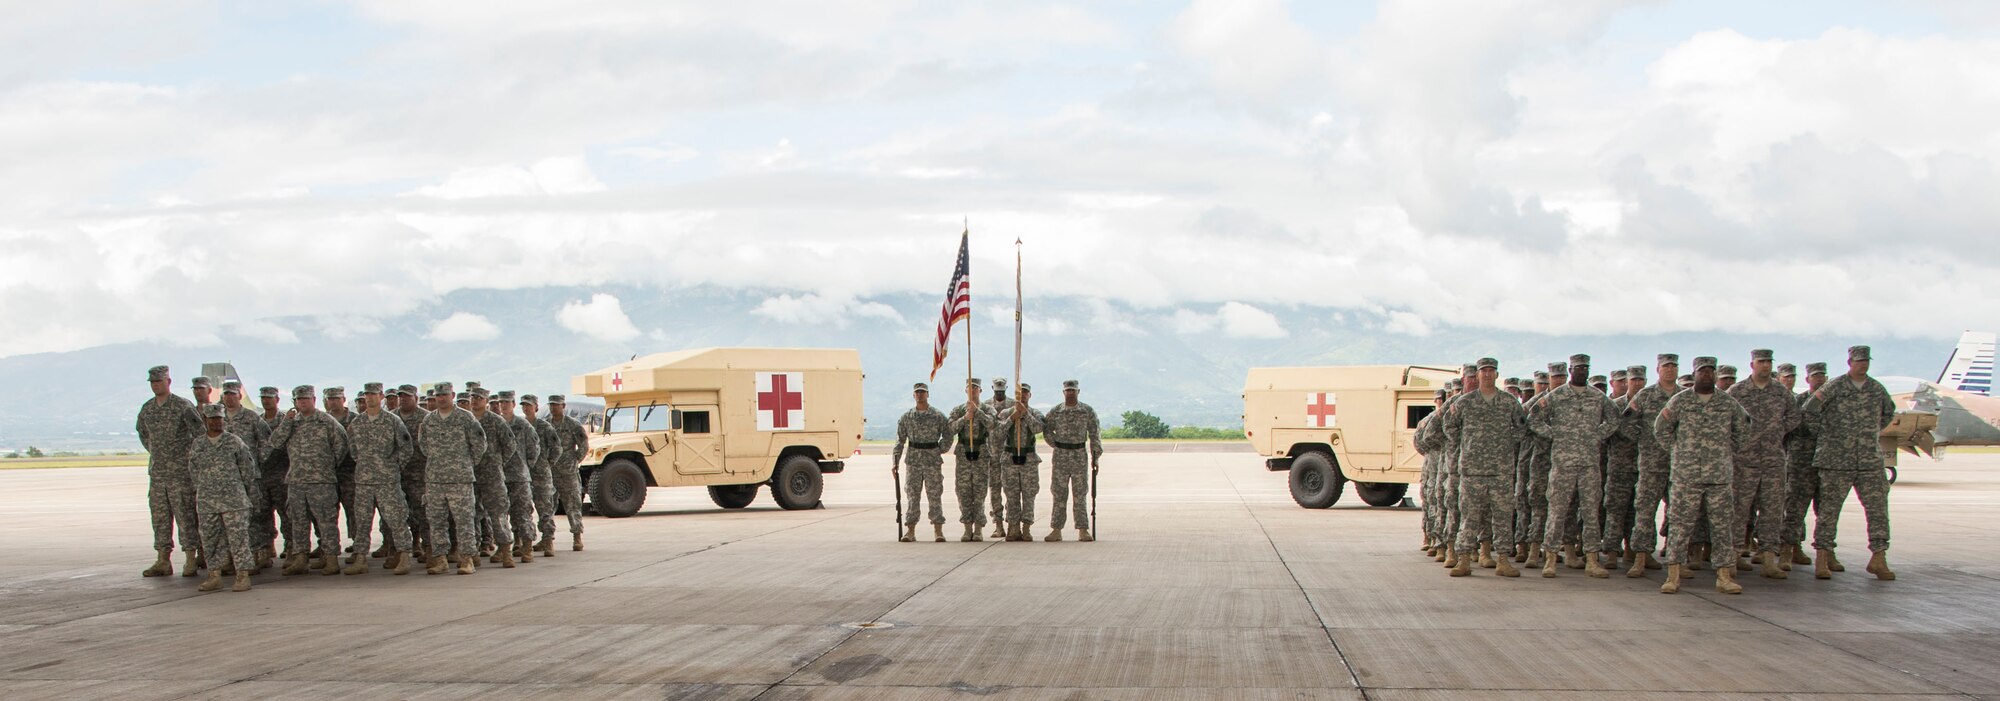 Two U.S. Army companies stand in formation for Joint Task Force-Bravo’s Medical Element Transfer of Authority Ceremony between the 228th Combat Support Hospital and the 94th Combat Support Hospital on Soto Cano Air Base, Honduras, Oct. 31, 2014.  Over the past two weeks the 228th CSH prepared the 94th CSH to take over their U.S. Southern Command mission.  The JTF-B MEDEL is the only forward deployed medical asset with and enduring presence within SOUTHCOM.  MEDEL provides medical support to DoD beneficiaries in garrison at Soto Cano AB, as well as supporting SOUTHCOM’s humanitarian assistance and disaster relief efforts.  (U.S. Air Force photo/Tech. Sgt. Heather Redman)